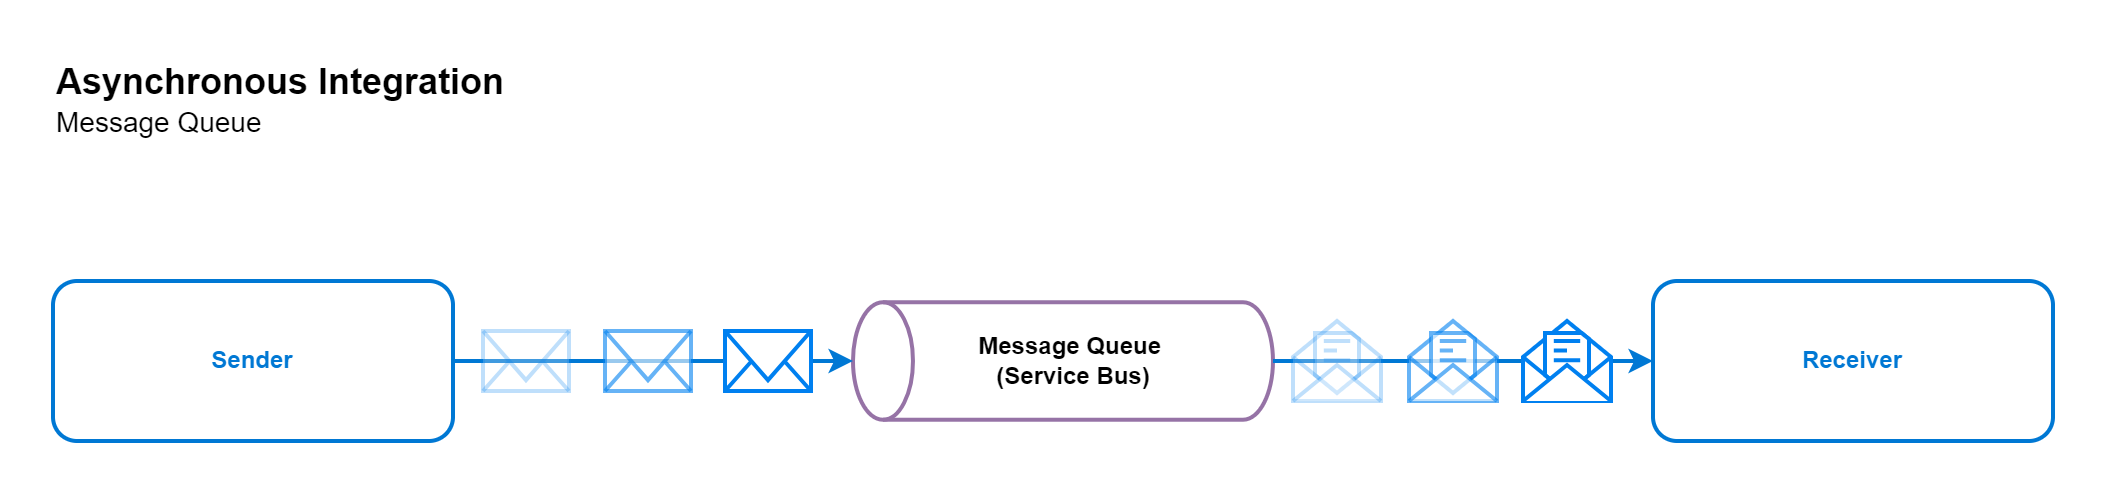 A diagram showing the async integration pattern using message queue.